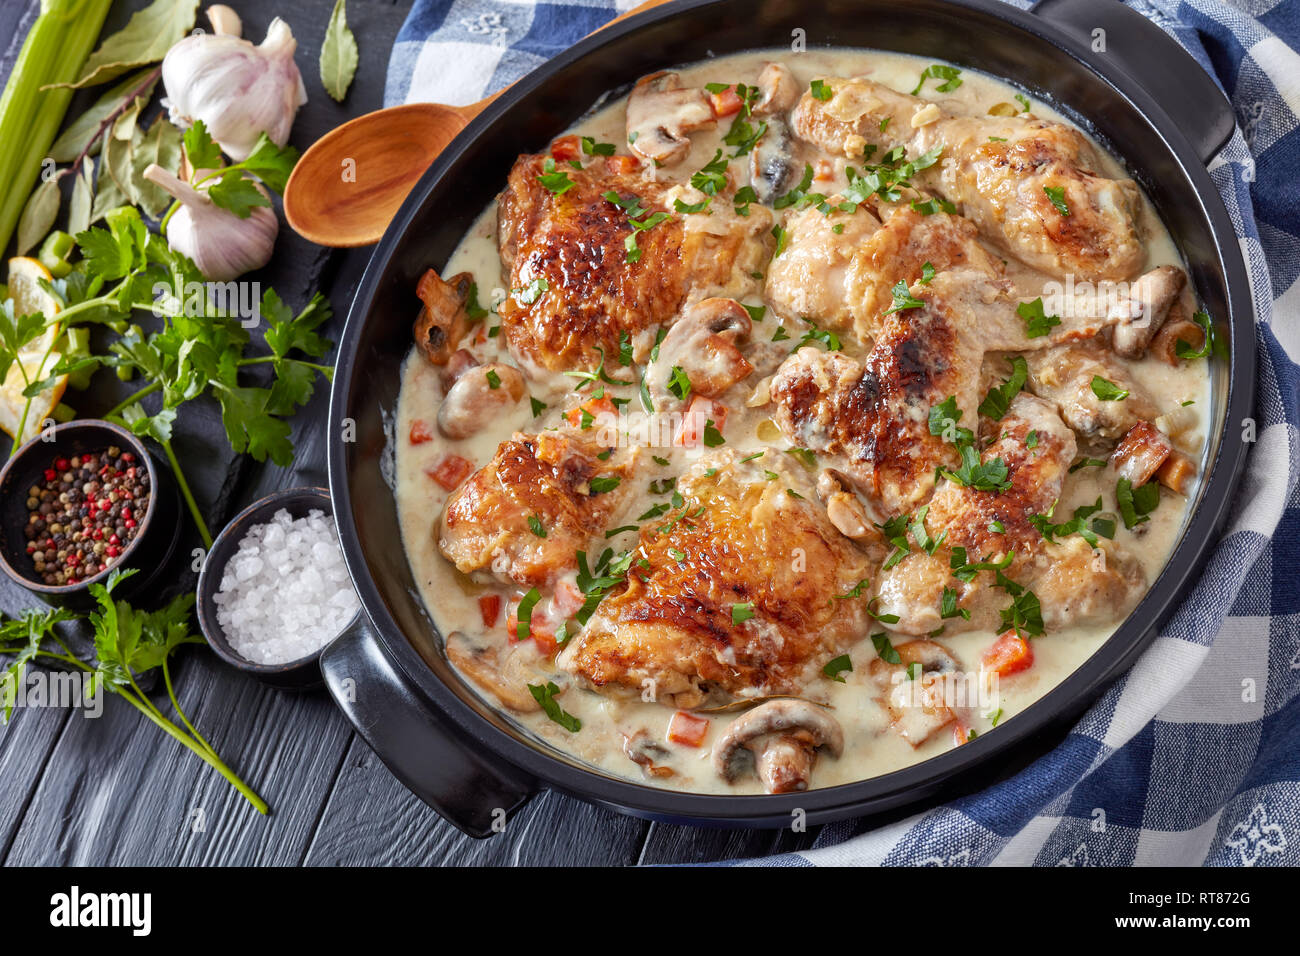 chicken fricassee in a black dutch oven - chicken meat browned and stewed in white wine creamy sauce with mushrooms and vegetables, classic french rec Stock Photo